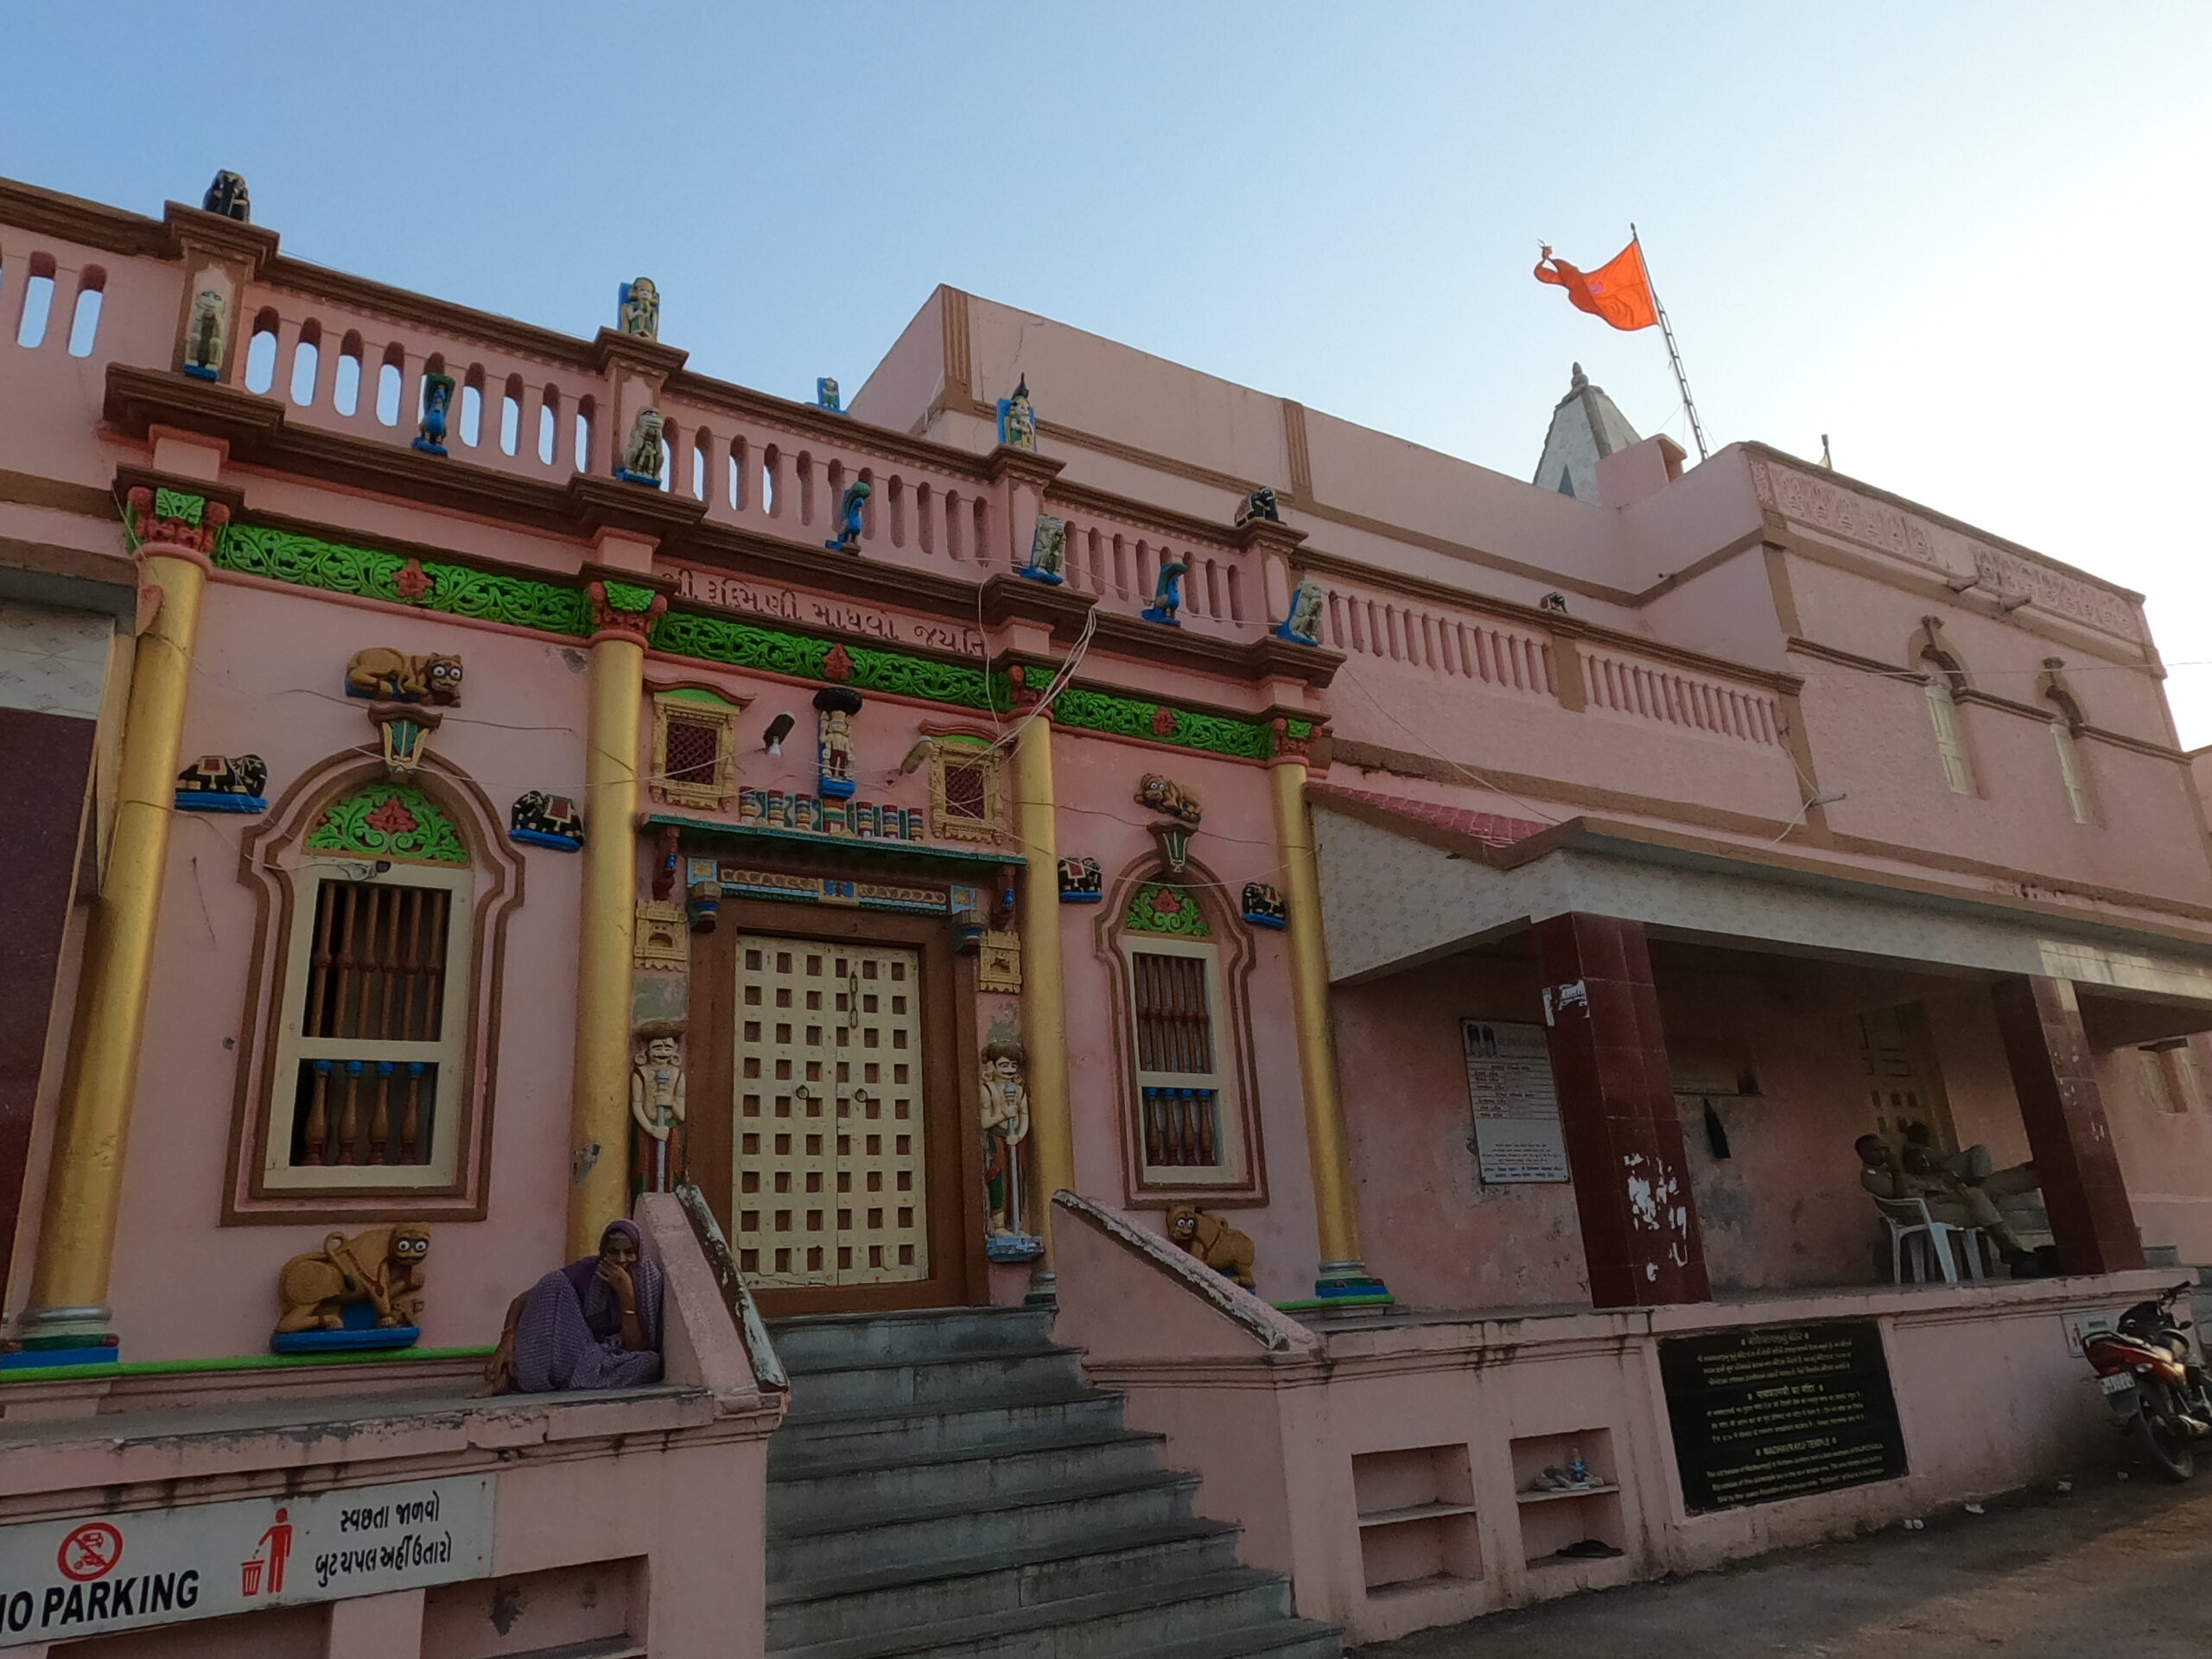 Shree Madhavraiji temple in Madhavpur, an offbeat destination in India